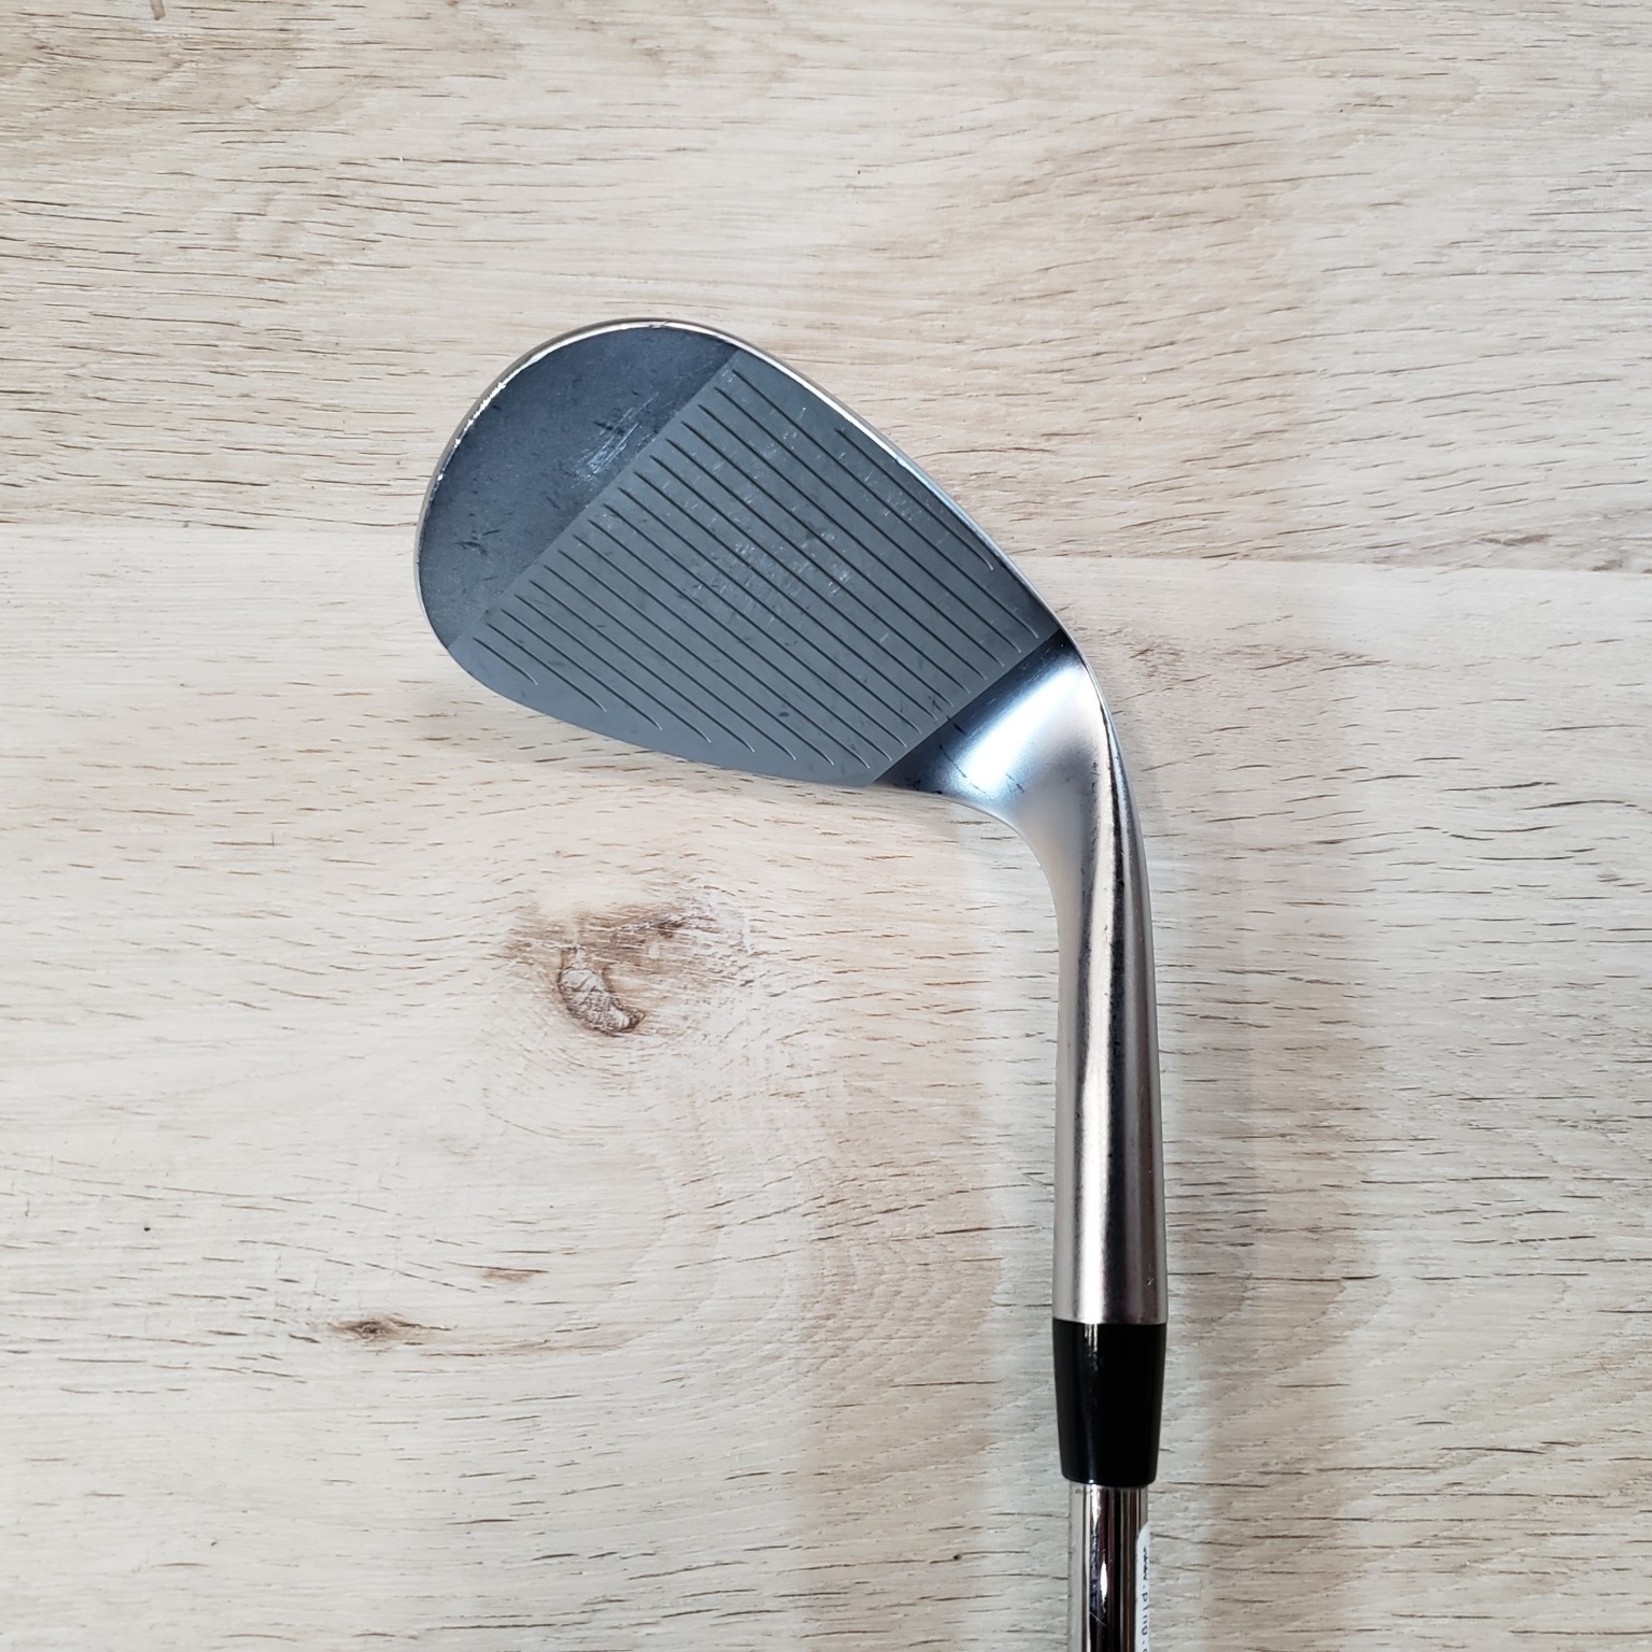 PING (Demo) Ping Glide 3.0 TS 58* 06 Wedge (LH)